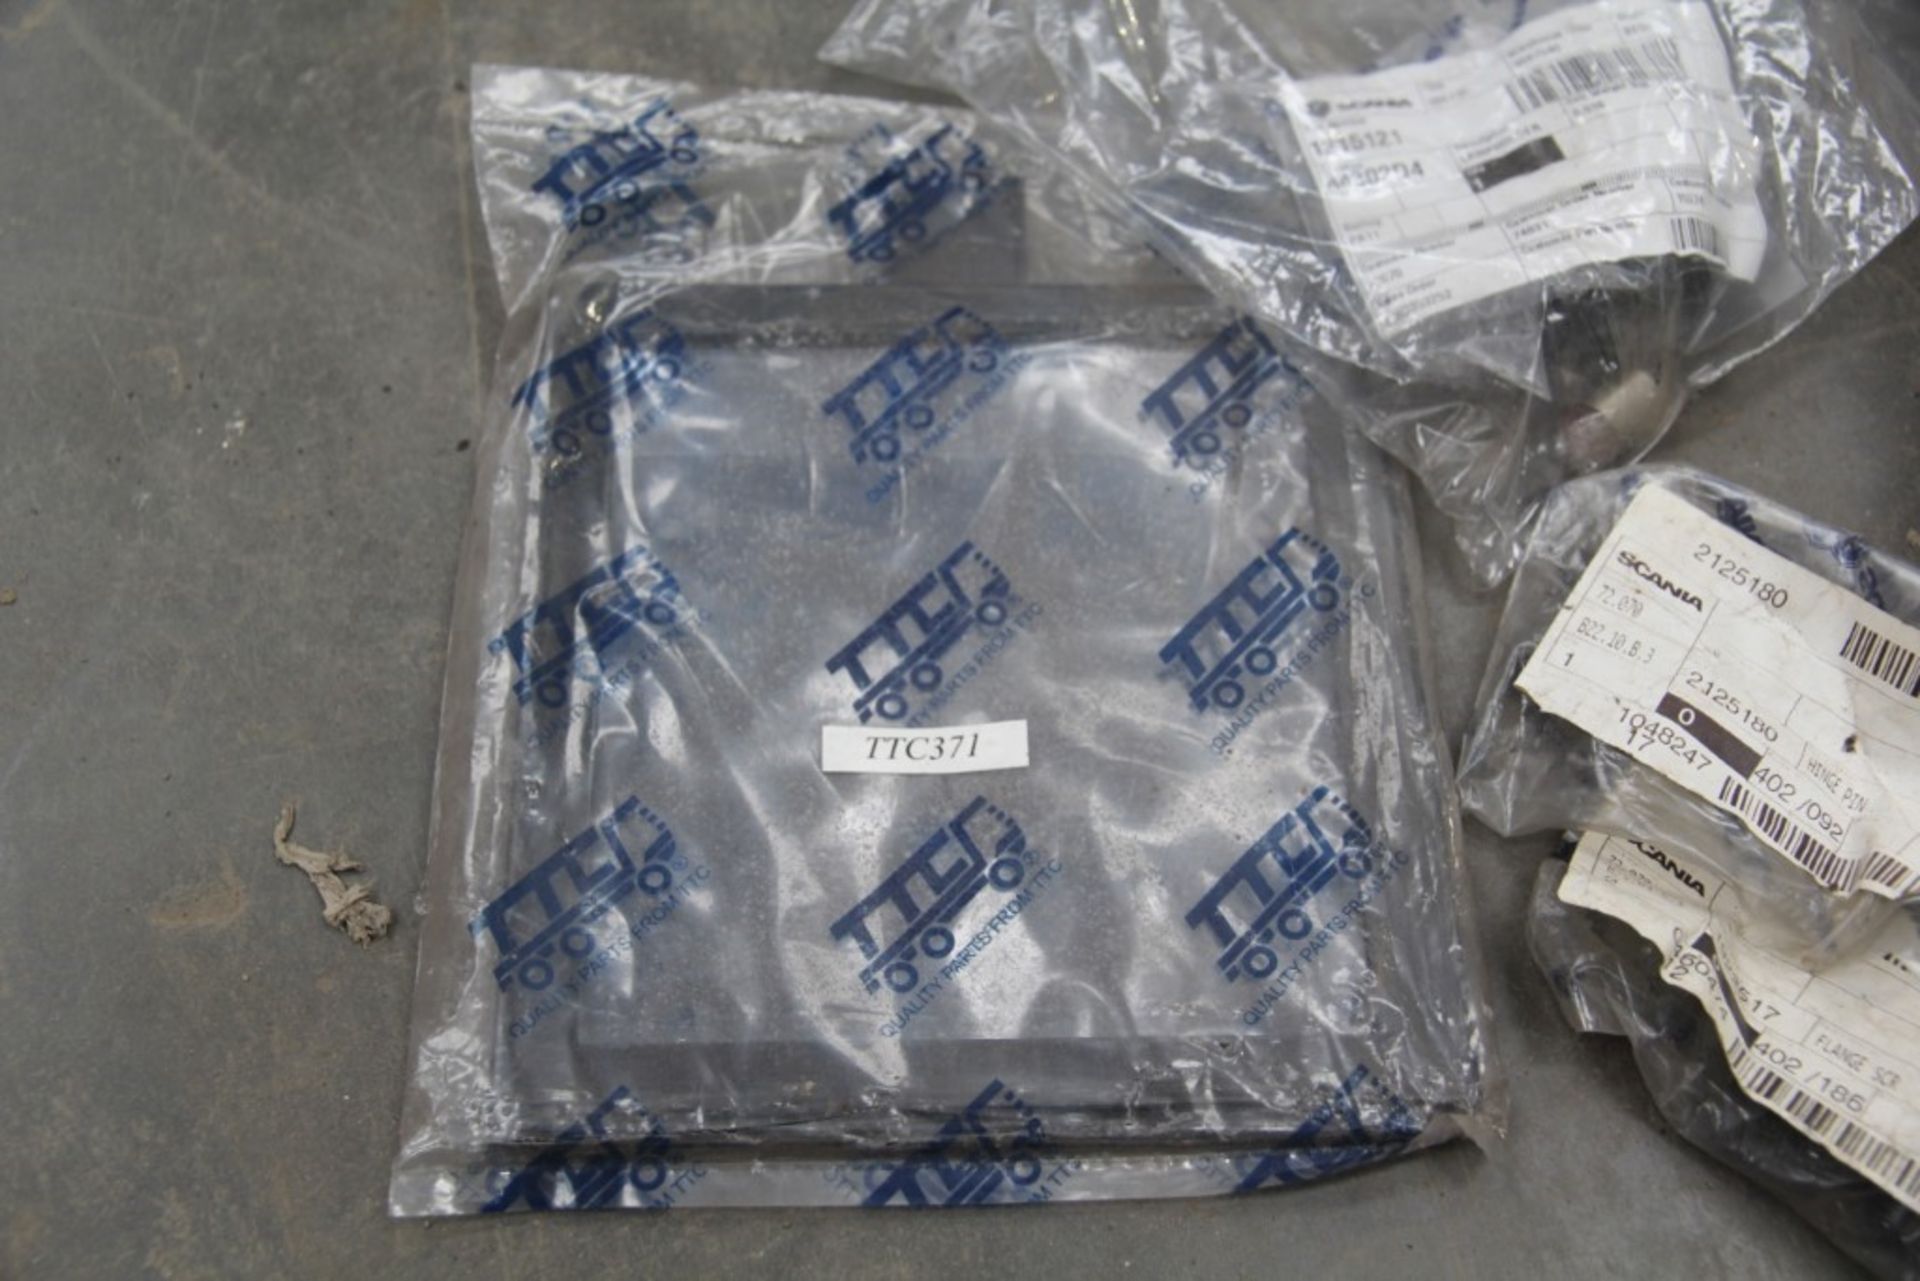 Scania Parts (1 Pallet) - Image 10 of 27